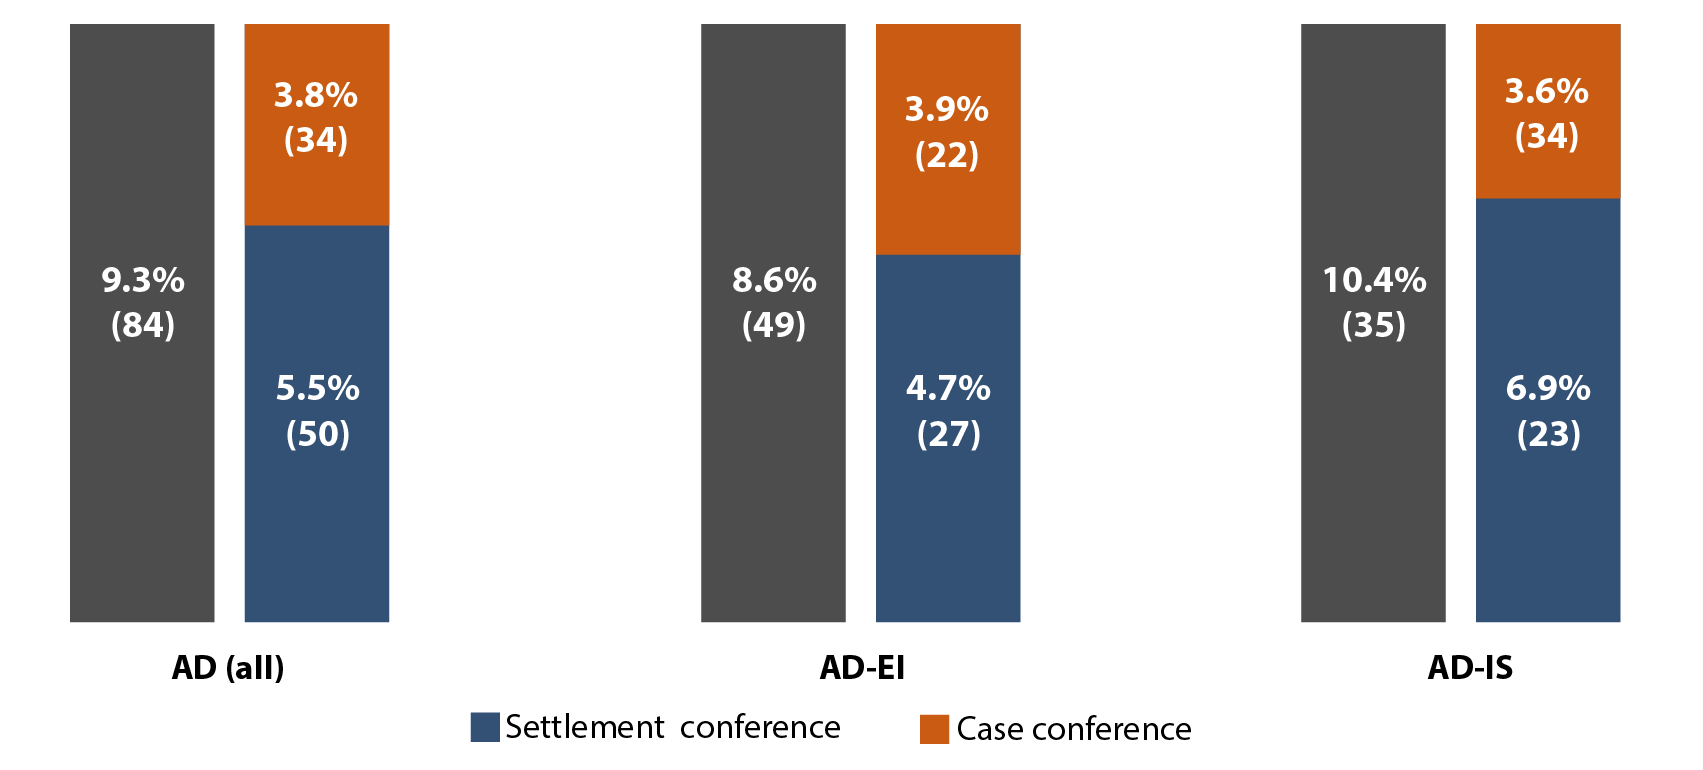 Files diverted to ADR (percentage and number)